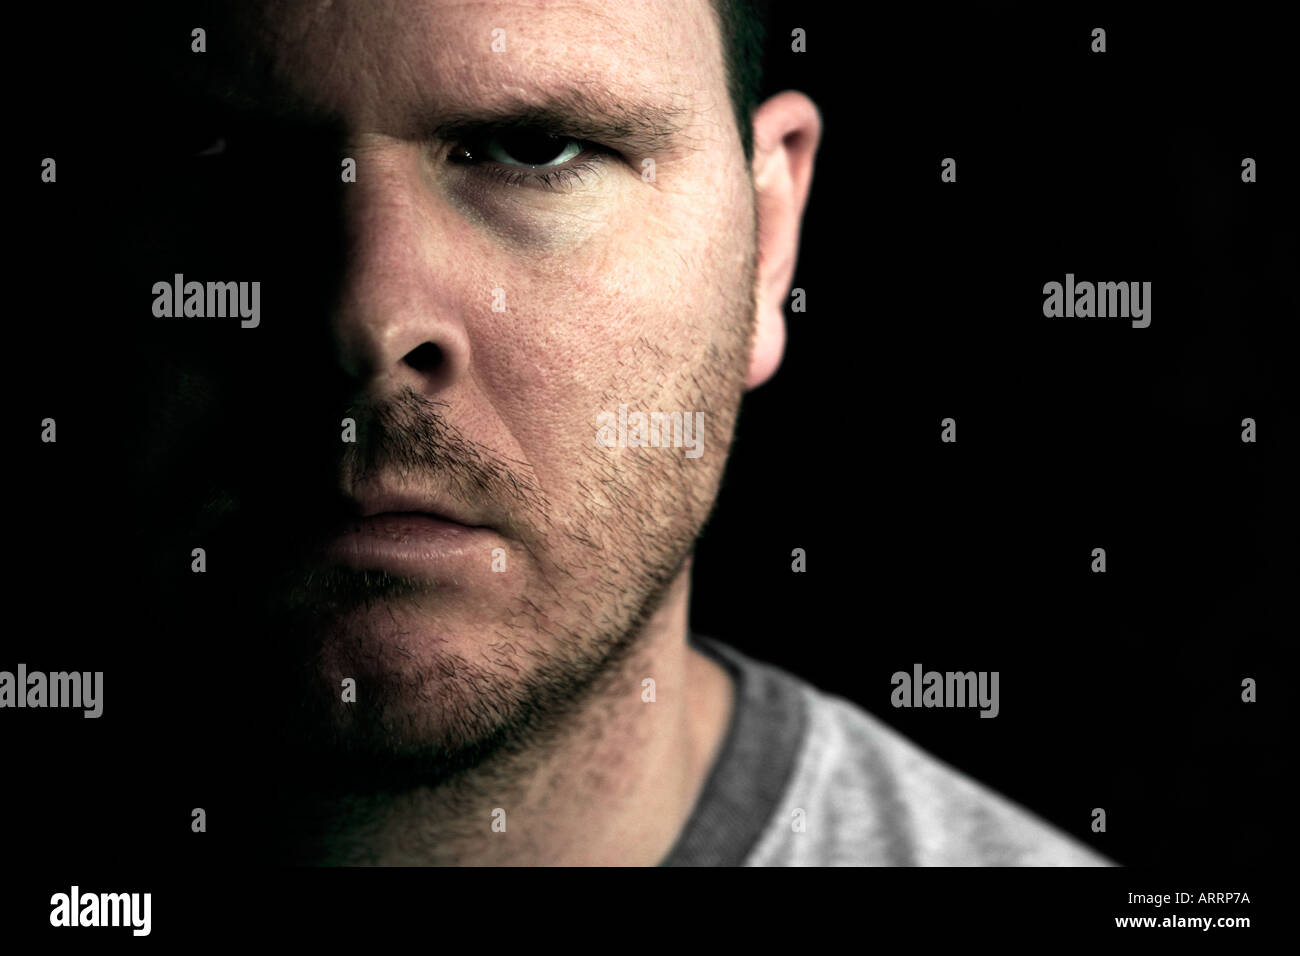 A man gives an intimidating stare. Stock Photo